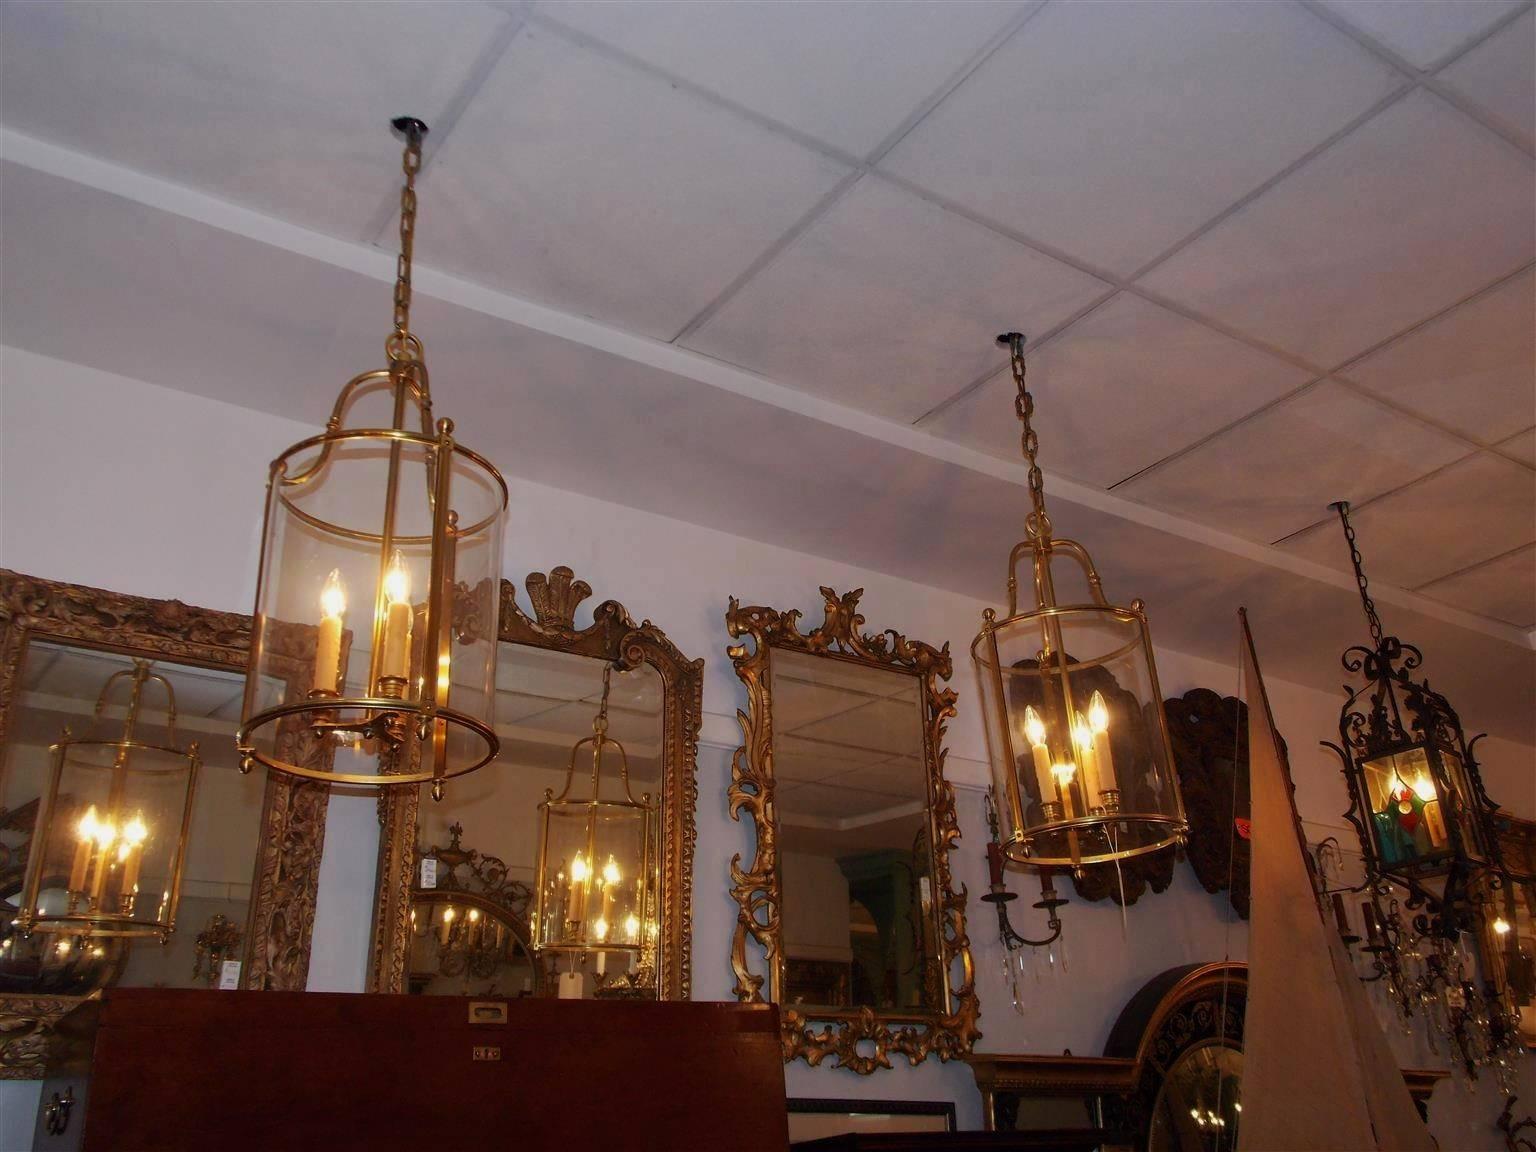 Pair of American brass hanging glass lanterns with scrolled arms , three light cluster, and terminating with stylized lemon finials. Originally candle powered, Late 19th century.